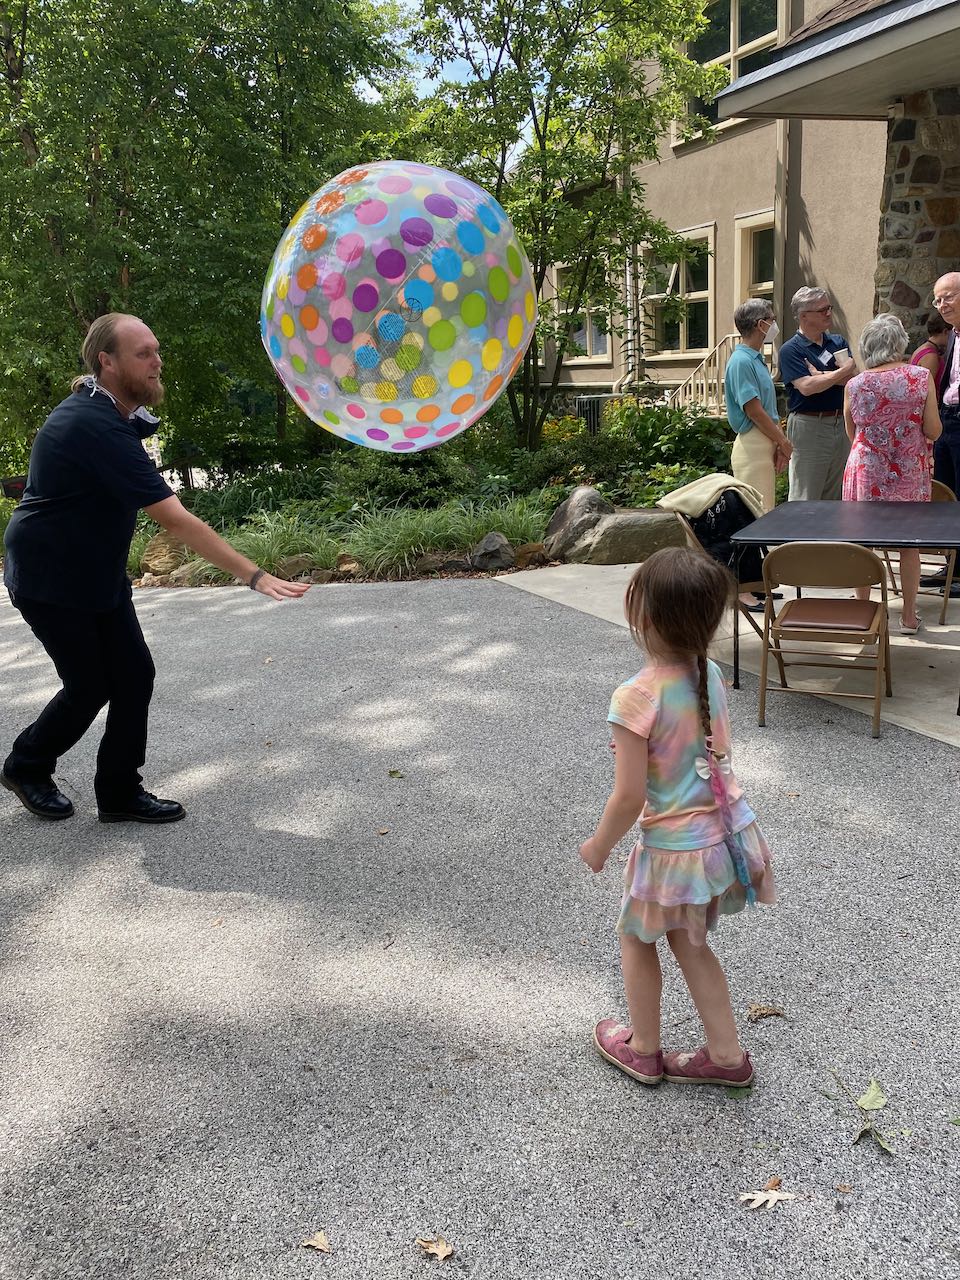 A middle-aged white man playing with a small white girl viewed from the back, with a rainbow-themed beach ball